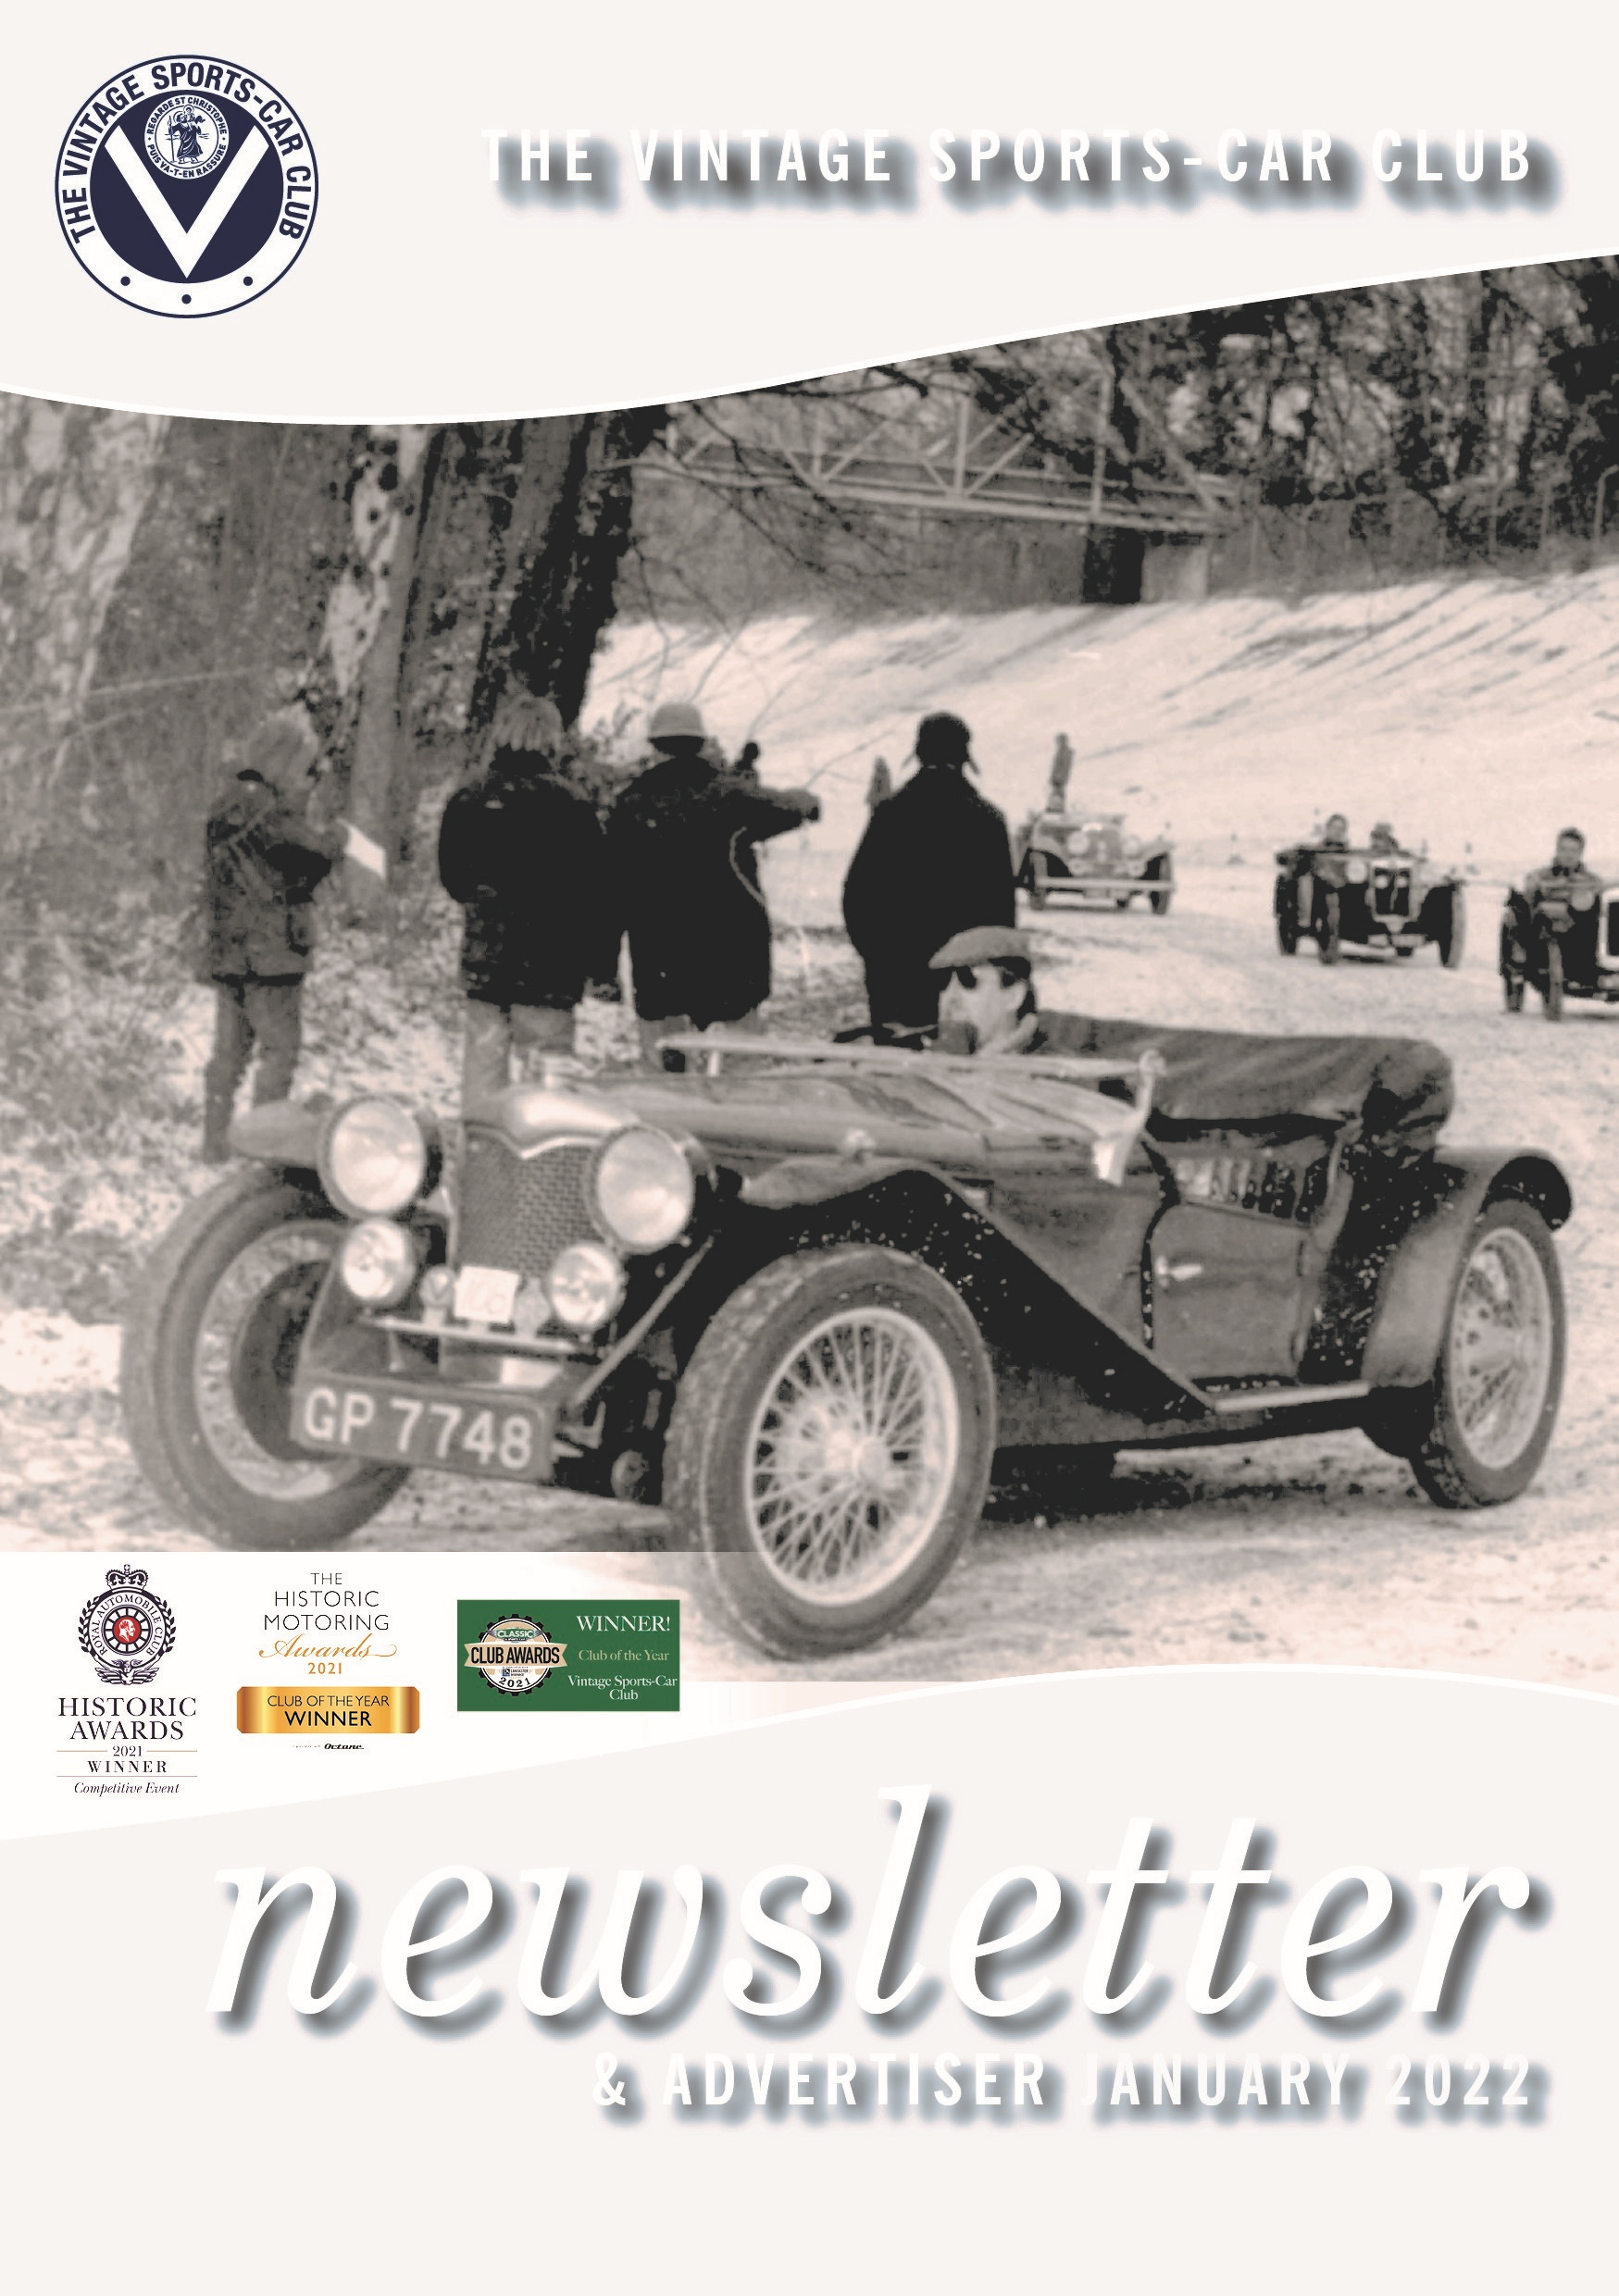 January 2022 Newsletter Now Available